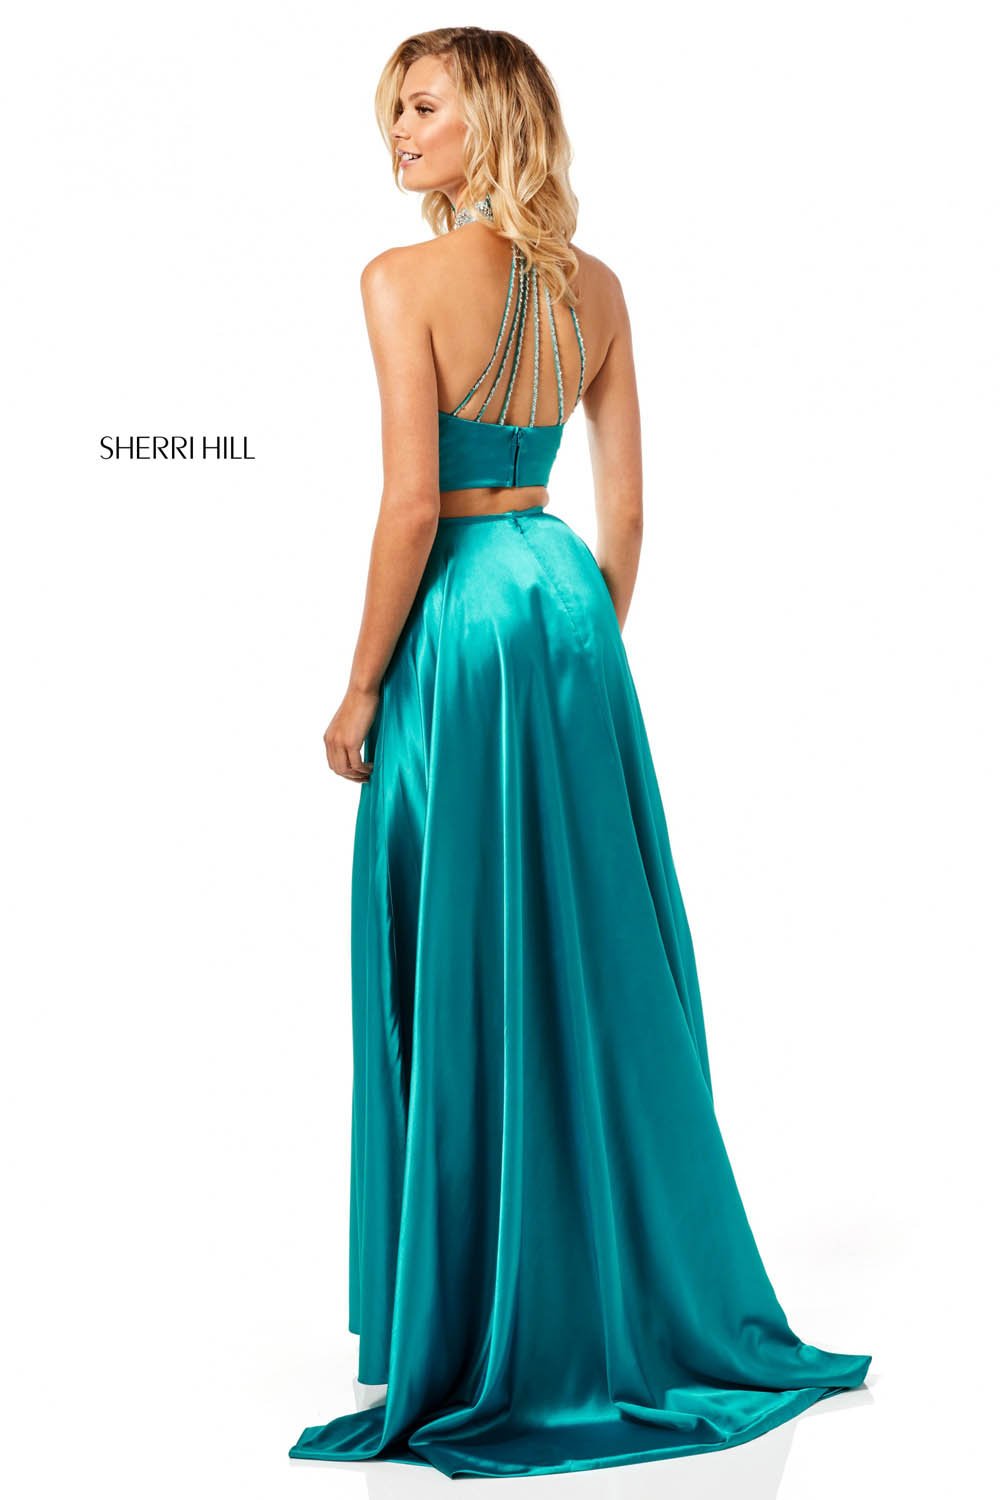 Sherri Hill 52491 dress images in these colors: Emerald, Teal, Red, Yellow, Royal.